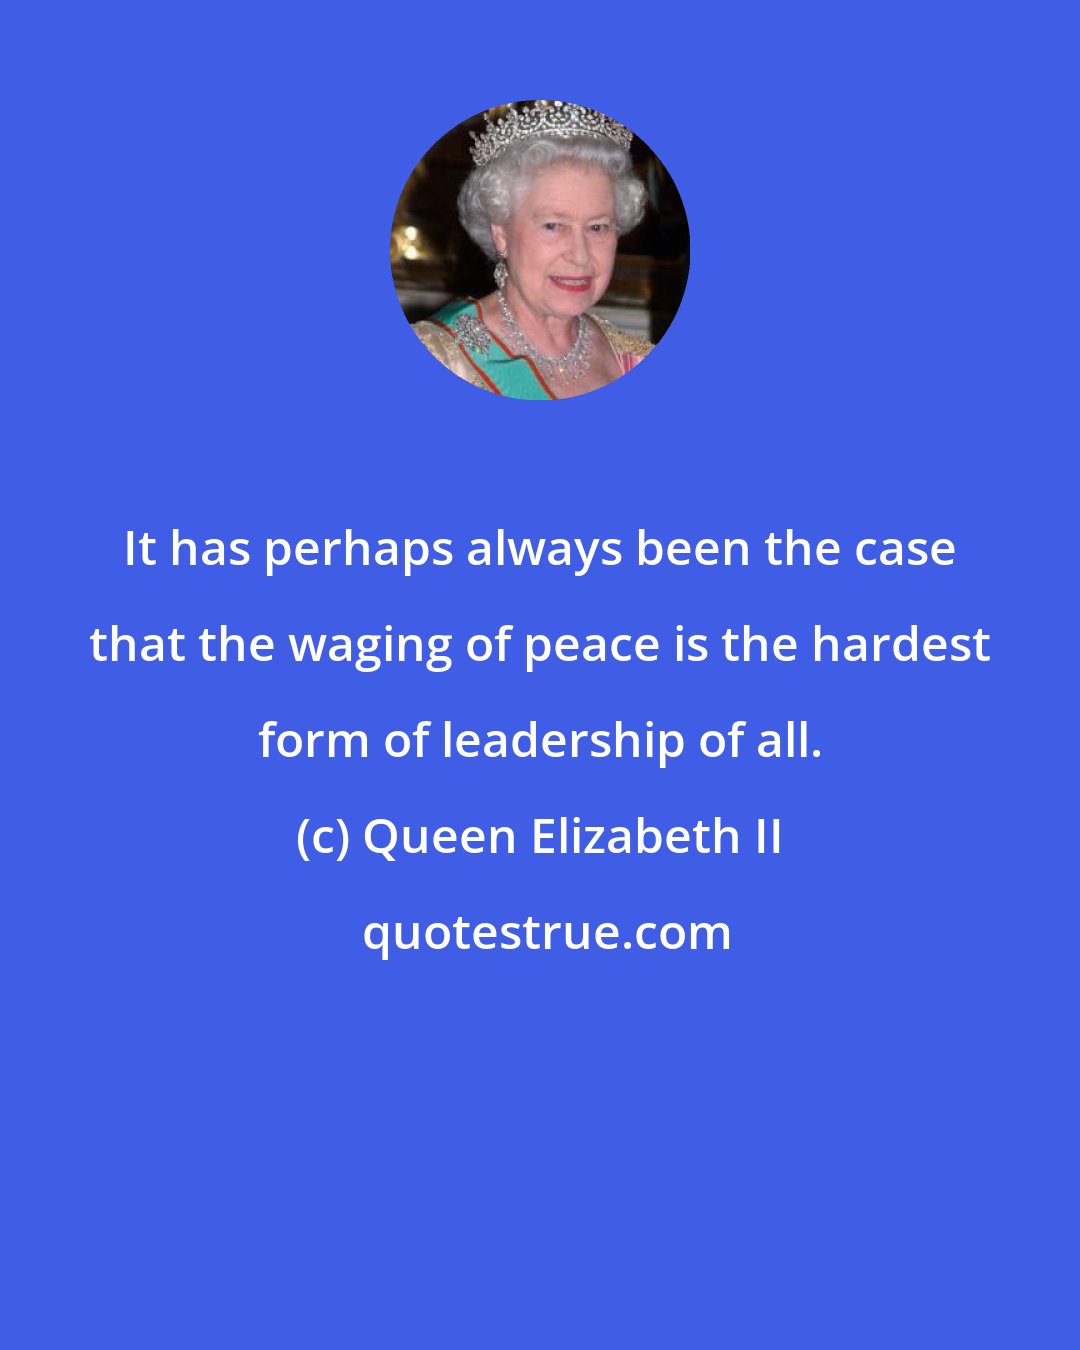 Queen Elizabeth II: It has perhaps always been the case that the waging of peace is the hardest form of leadership of all.